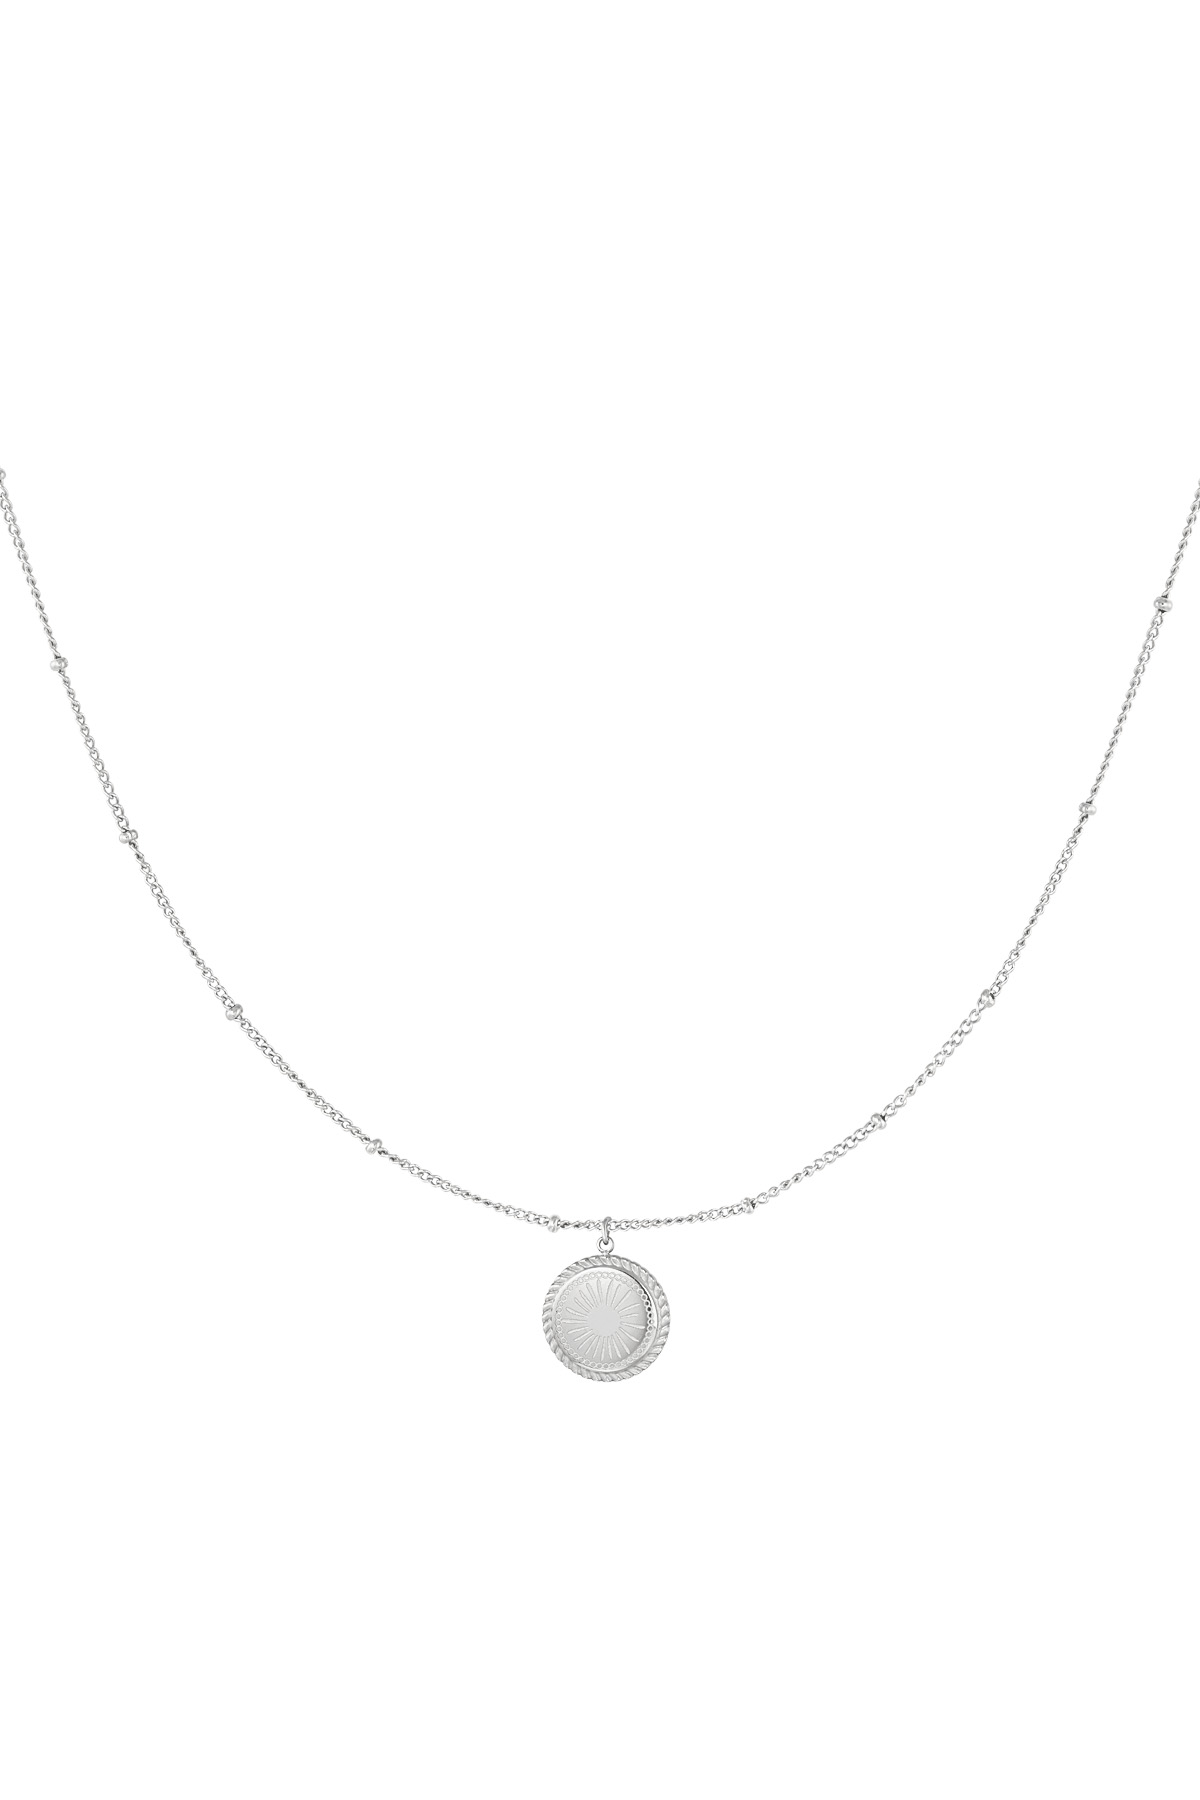 Necklace double round coin - silver h5 